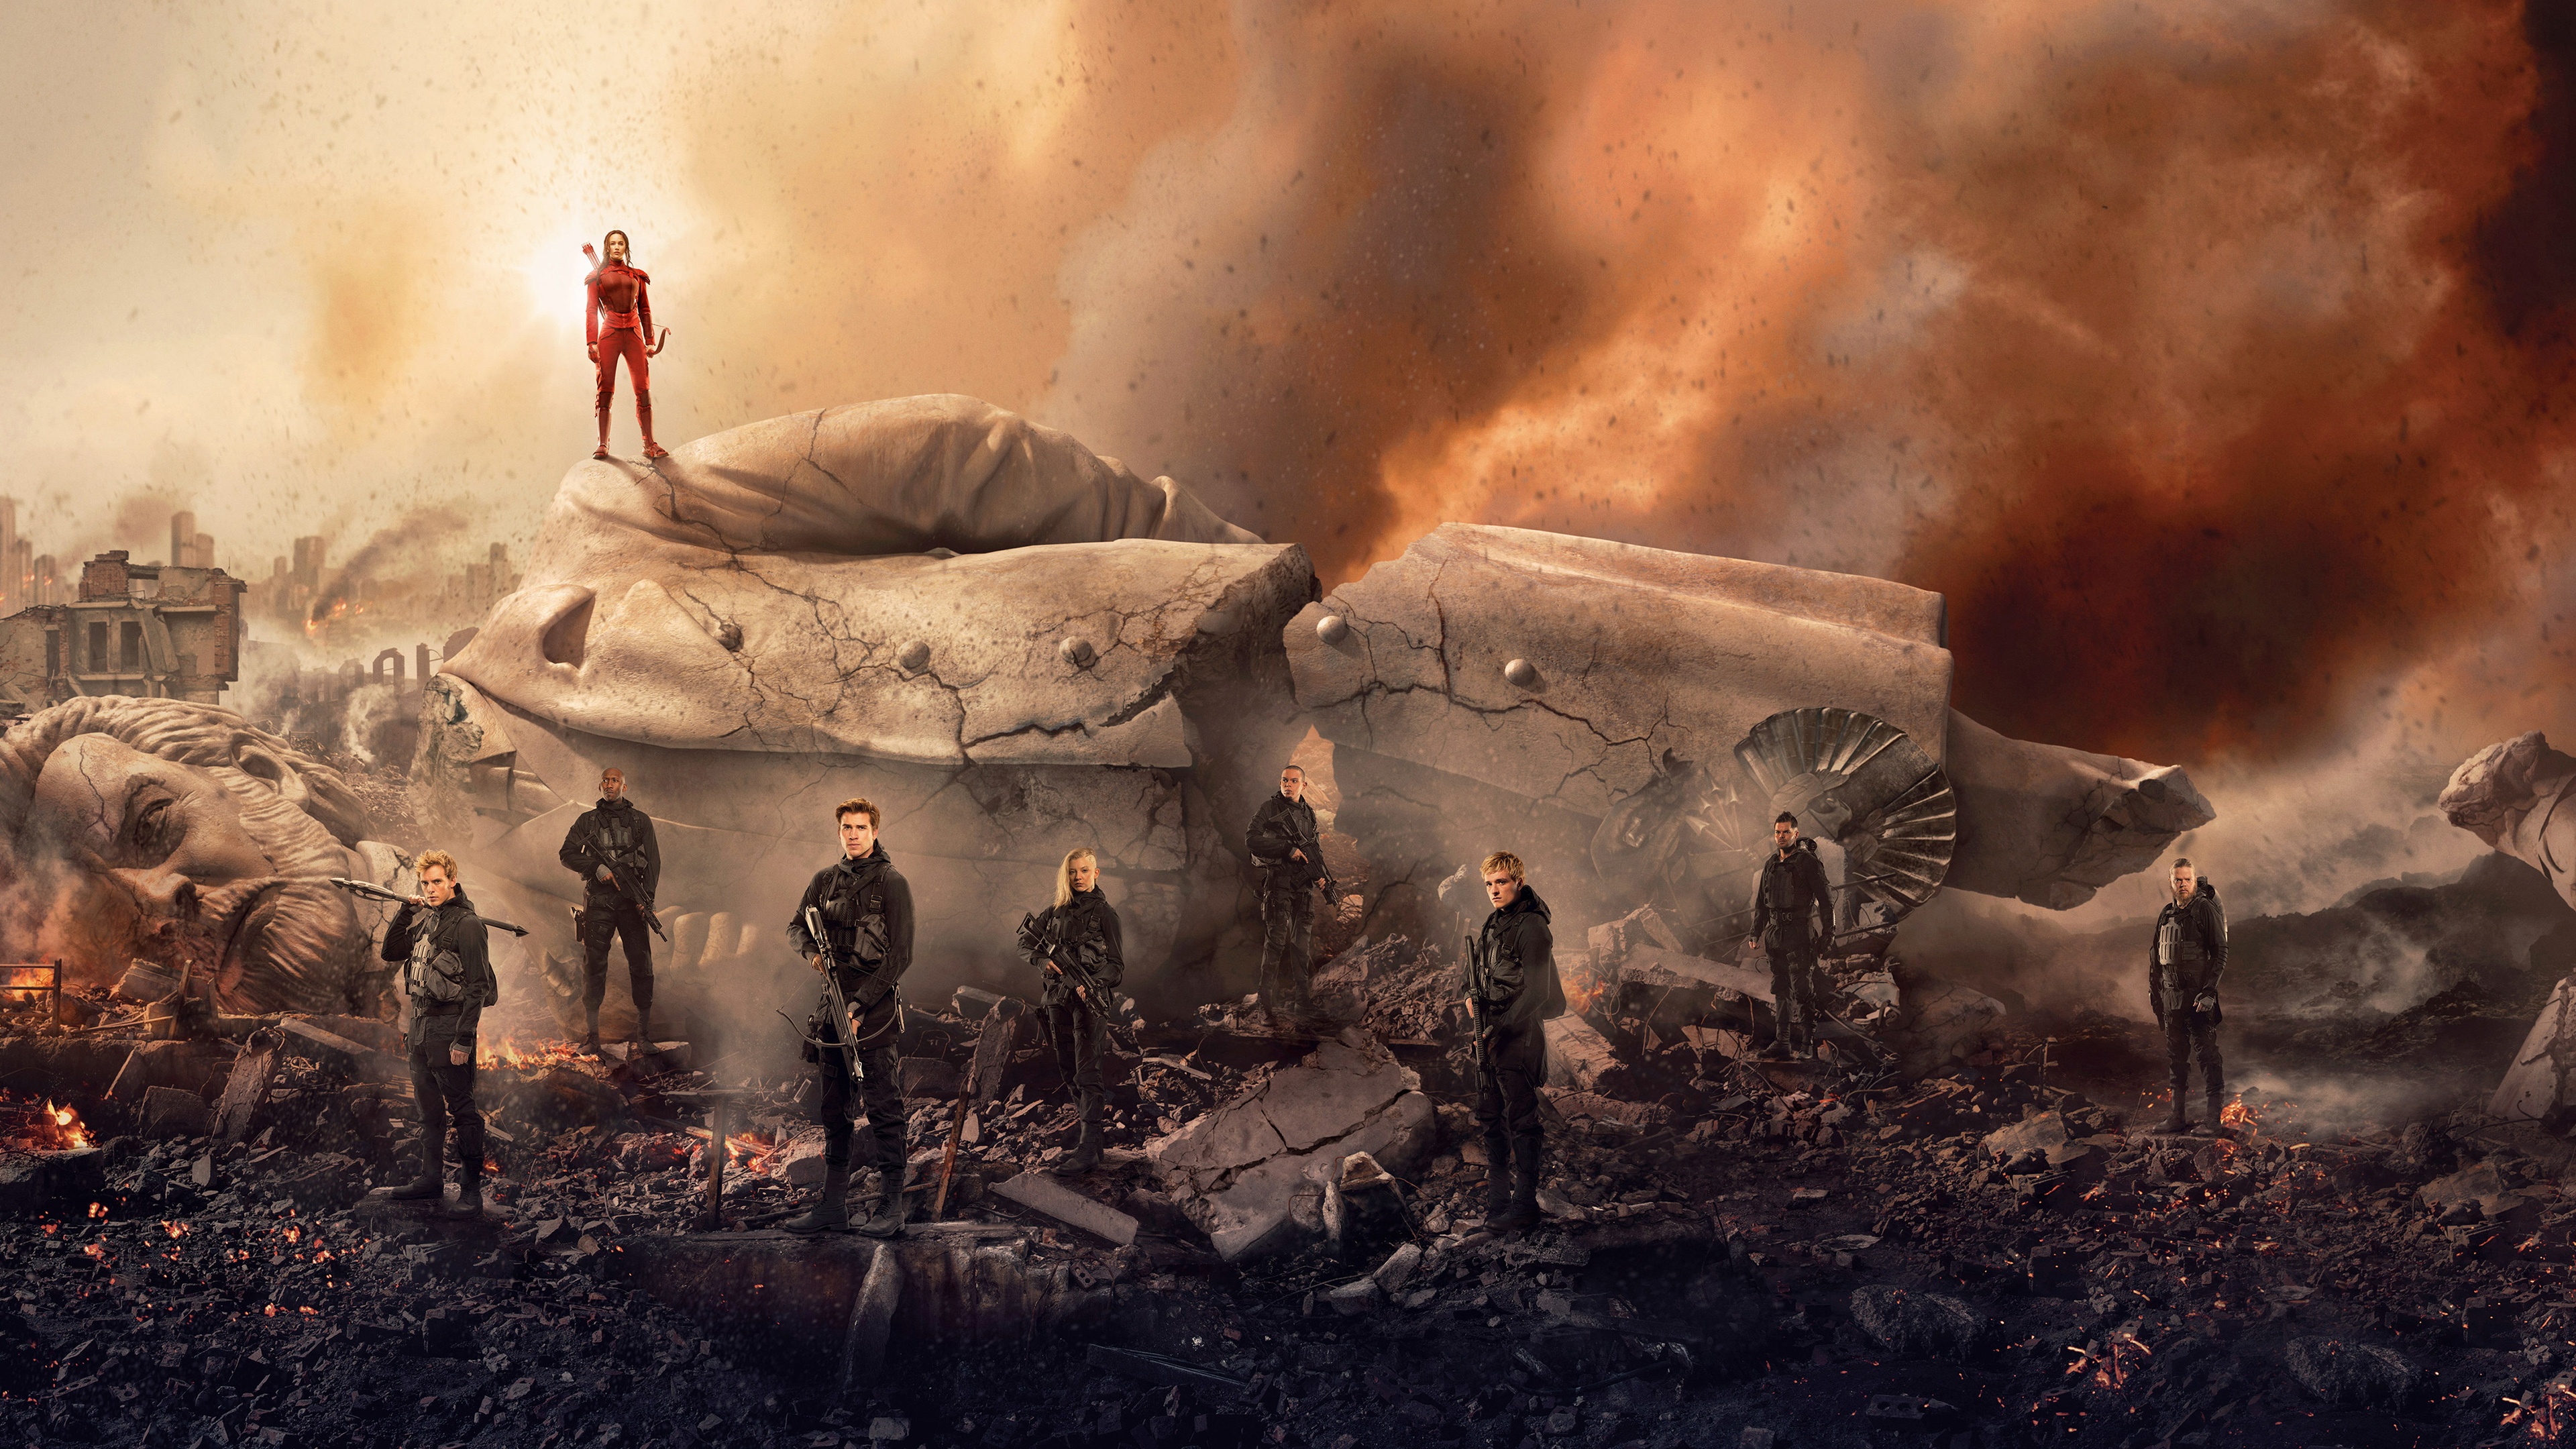 Hunger Games The Hunger Games Mockingjay Part 2 Movies 3840x2160